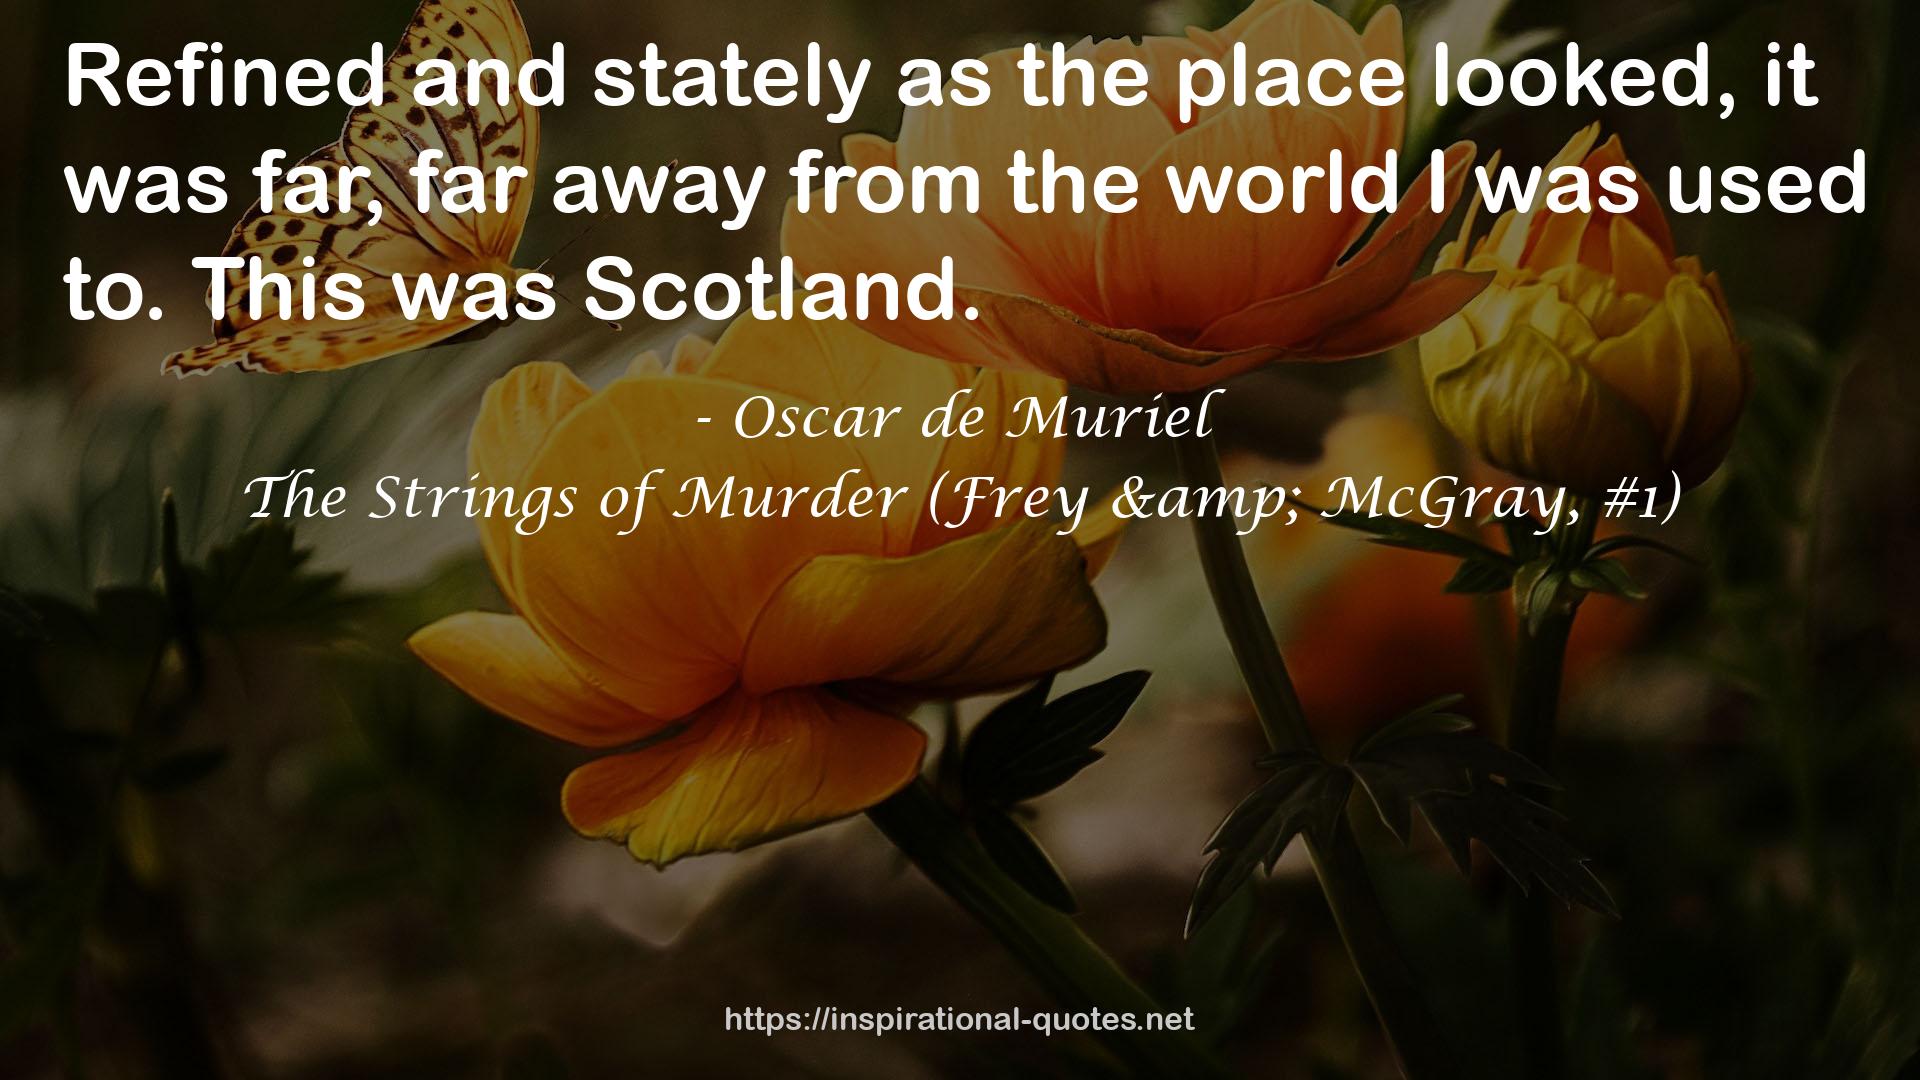 The Strings of Murder (Frey & McGray, #1) QUOTES